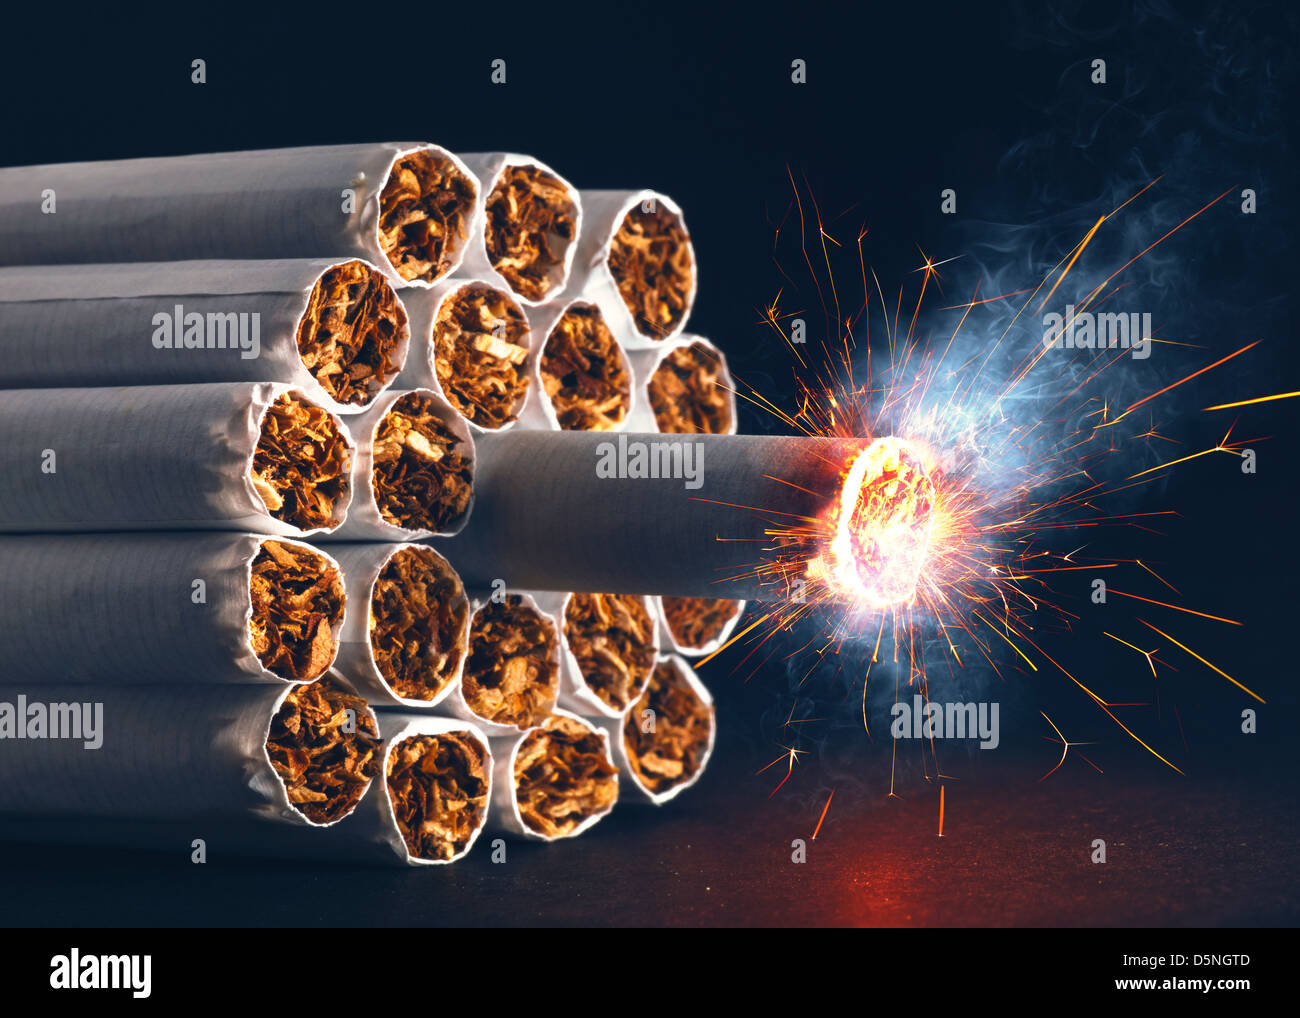 A pack of cigarettes in the form of dynamite ready to explode. Stock Photo